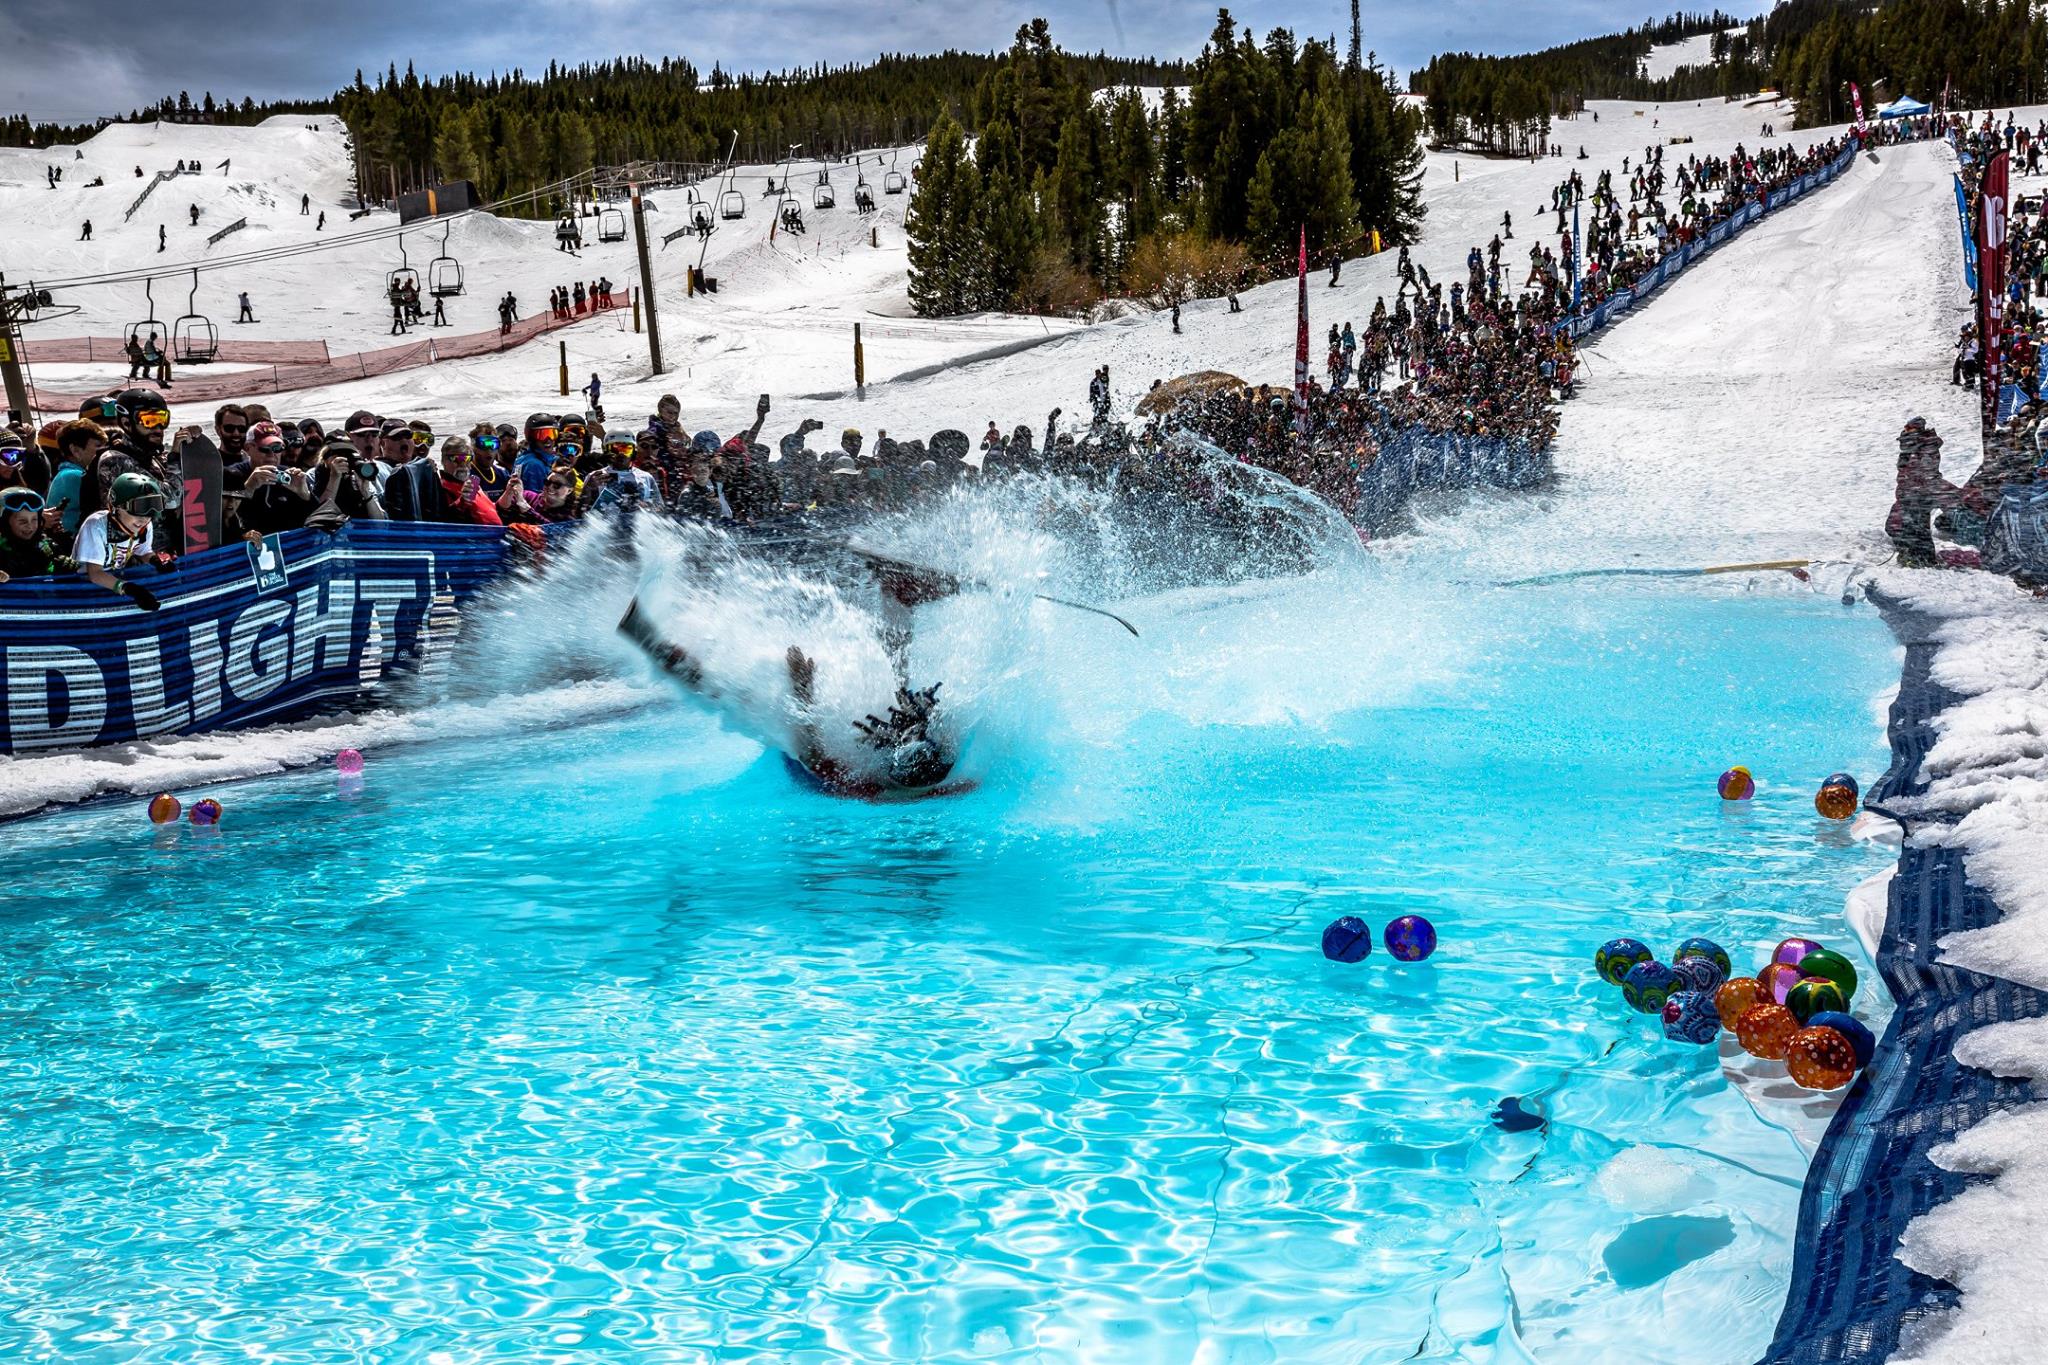 A skiier falling into the water during the Breck Plunge at Breckenridge Ski Resort.